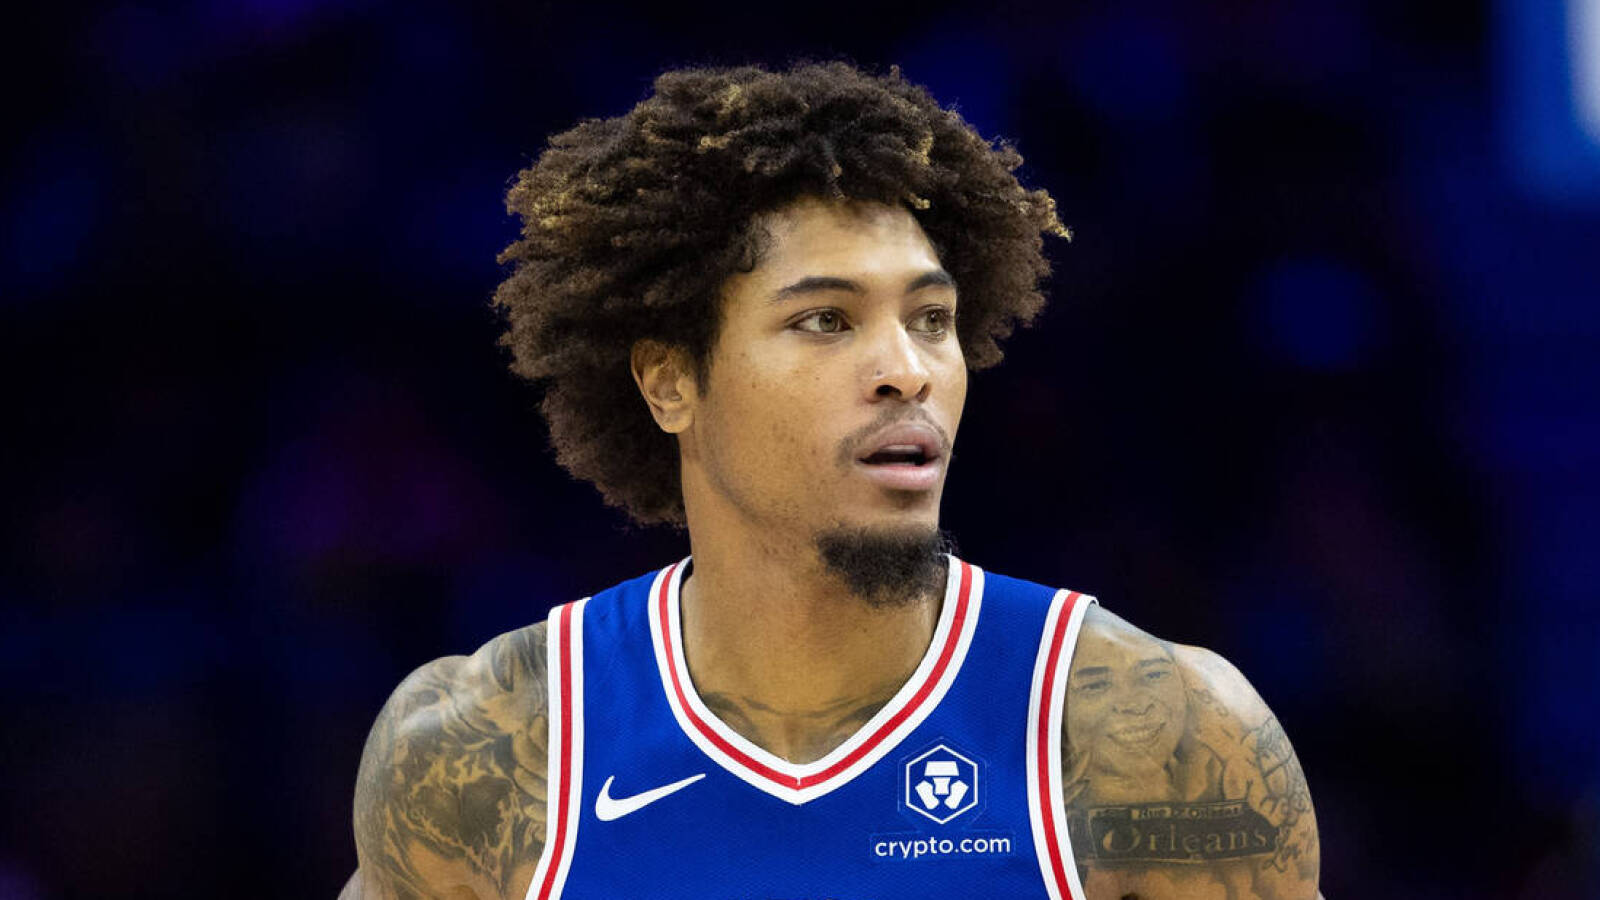 New details emerge regarding Sixers' Kelly Oubre Jr.'s condition after being struck by car